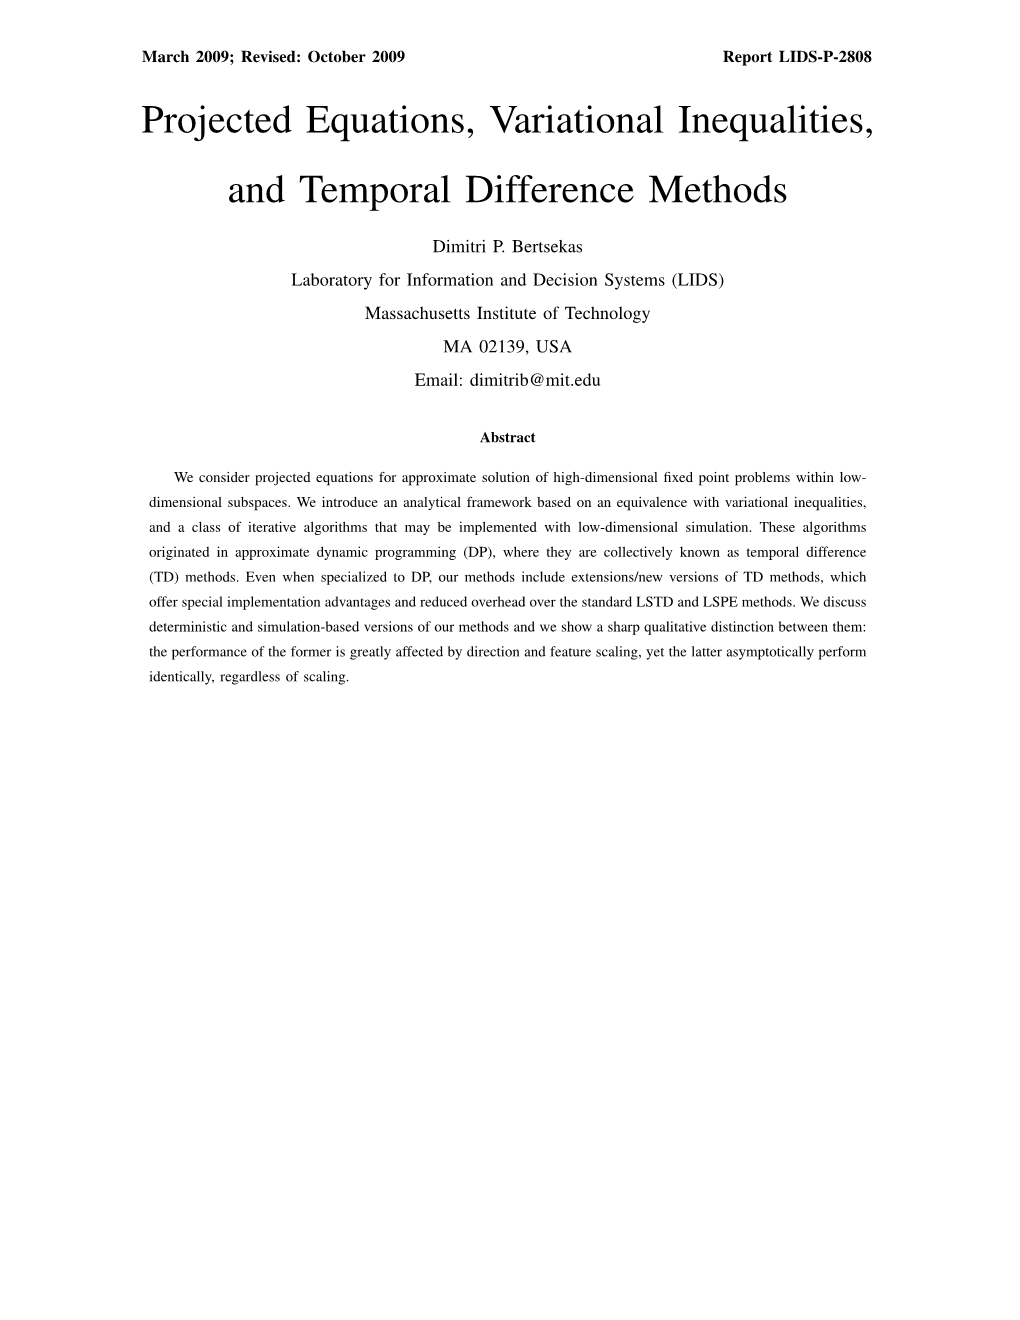 Projected Equations, Variational Inequalities, and Temporal Difference Methods